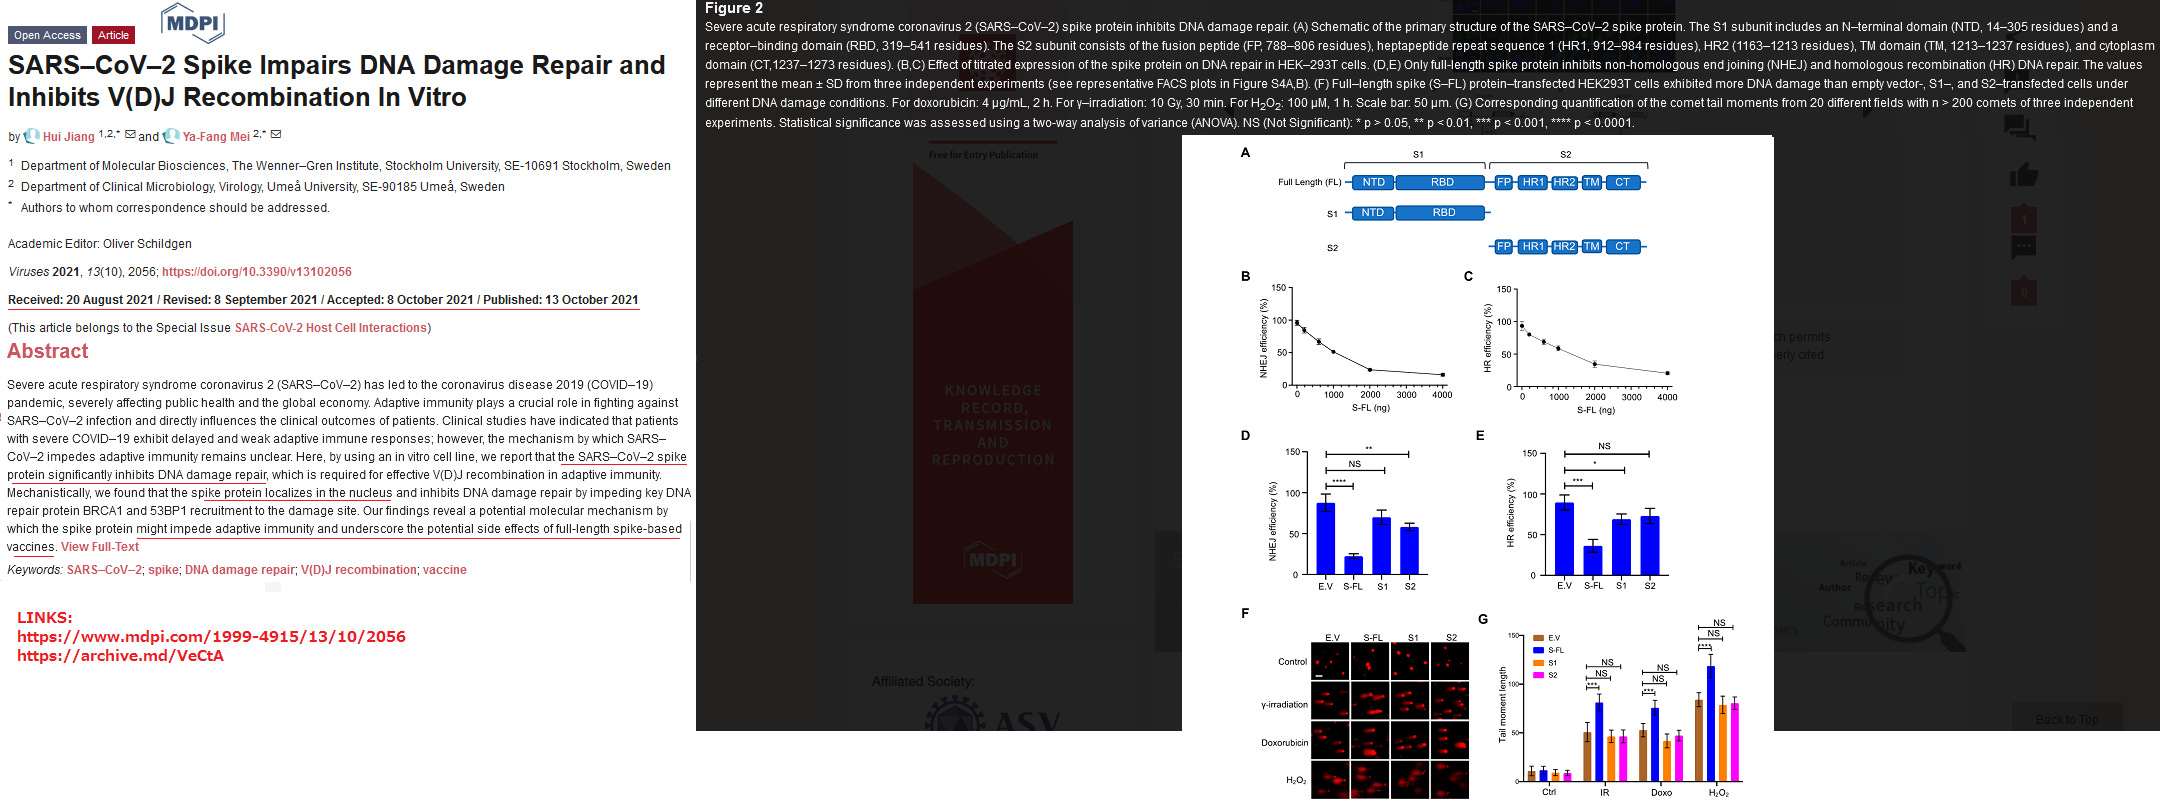 SARS–CoV–2 Spike Impairs DNA Damage Repair and Inhibits V(D)J Recombination In Vitro.png